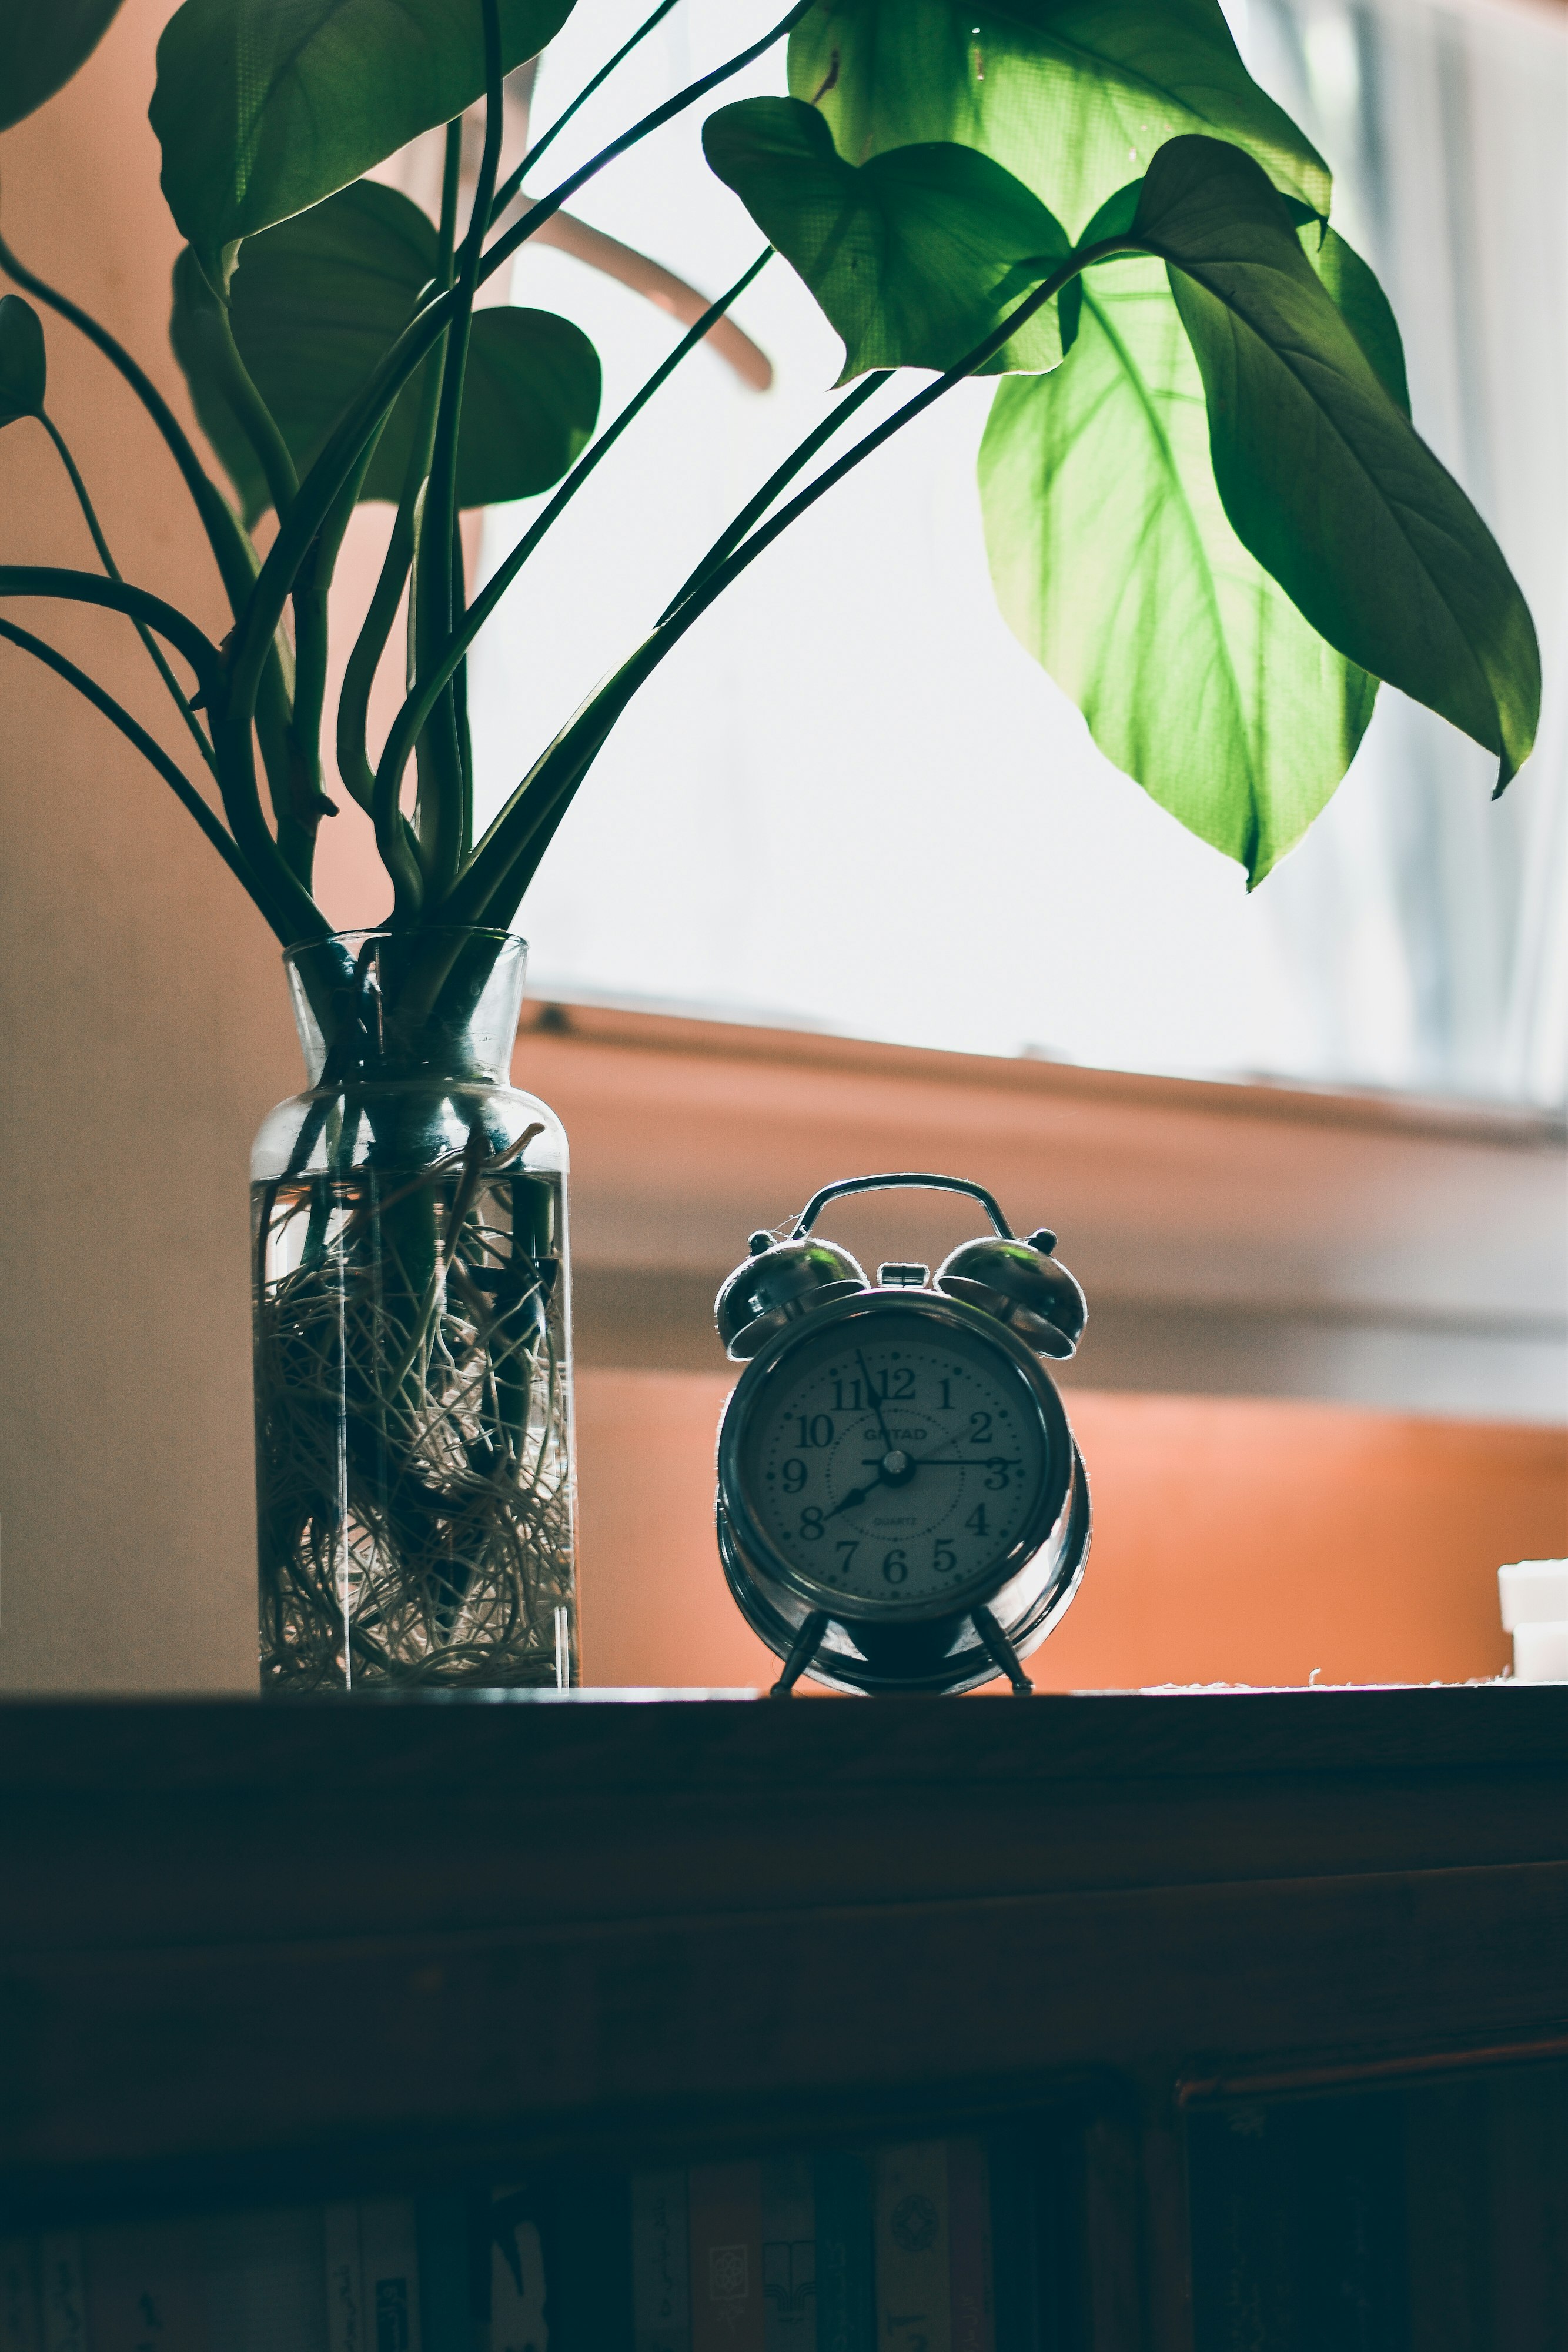 silver and white analog alarm clock beside green plant